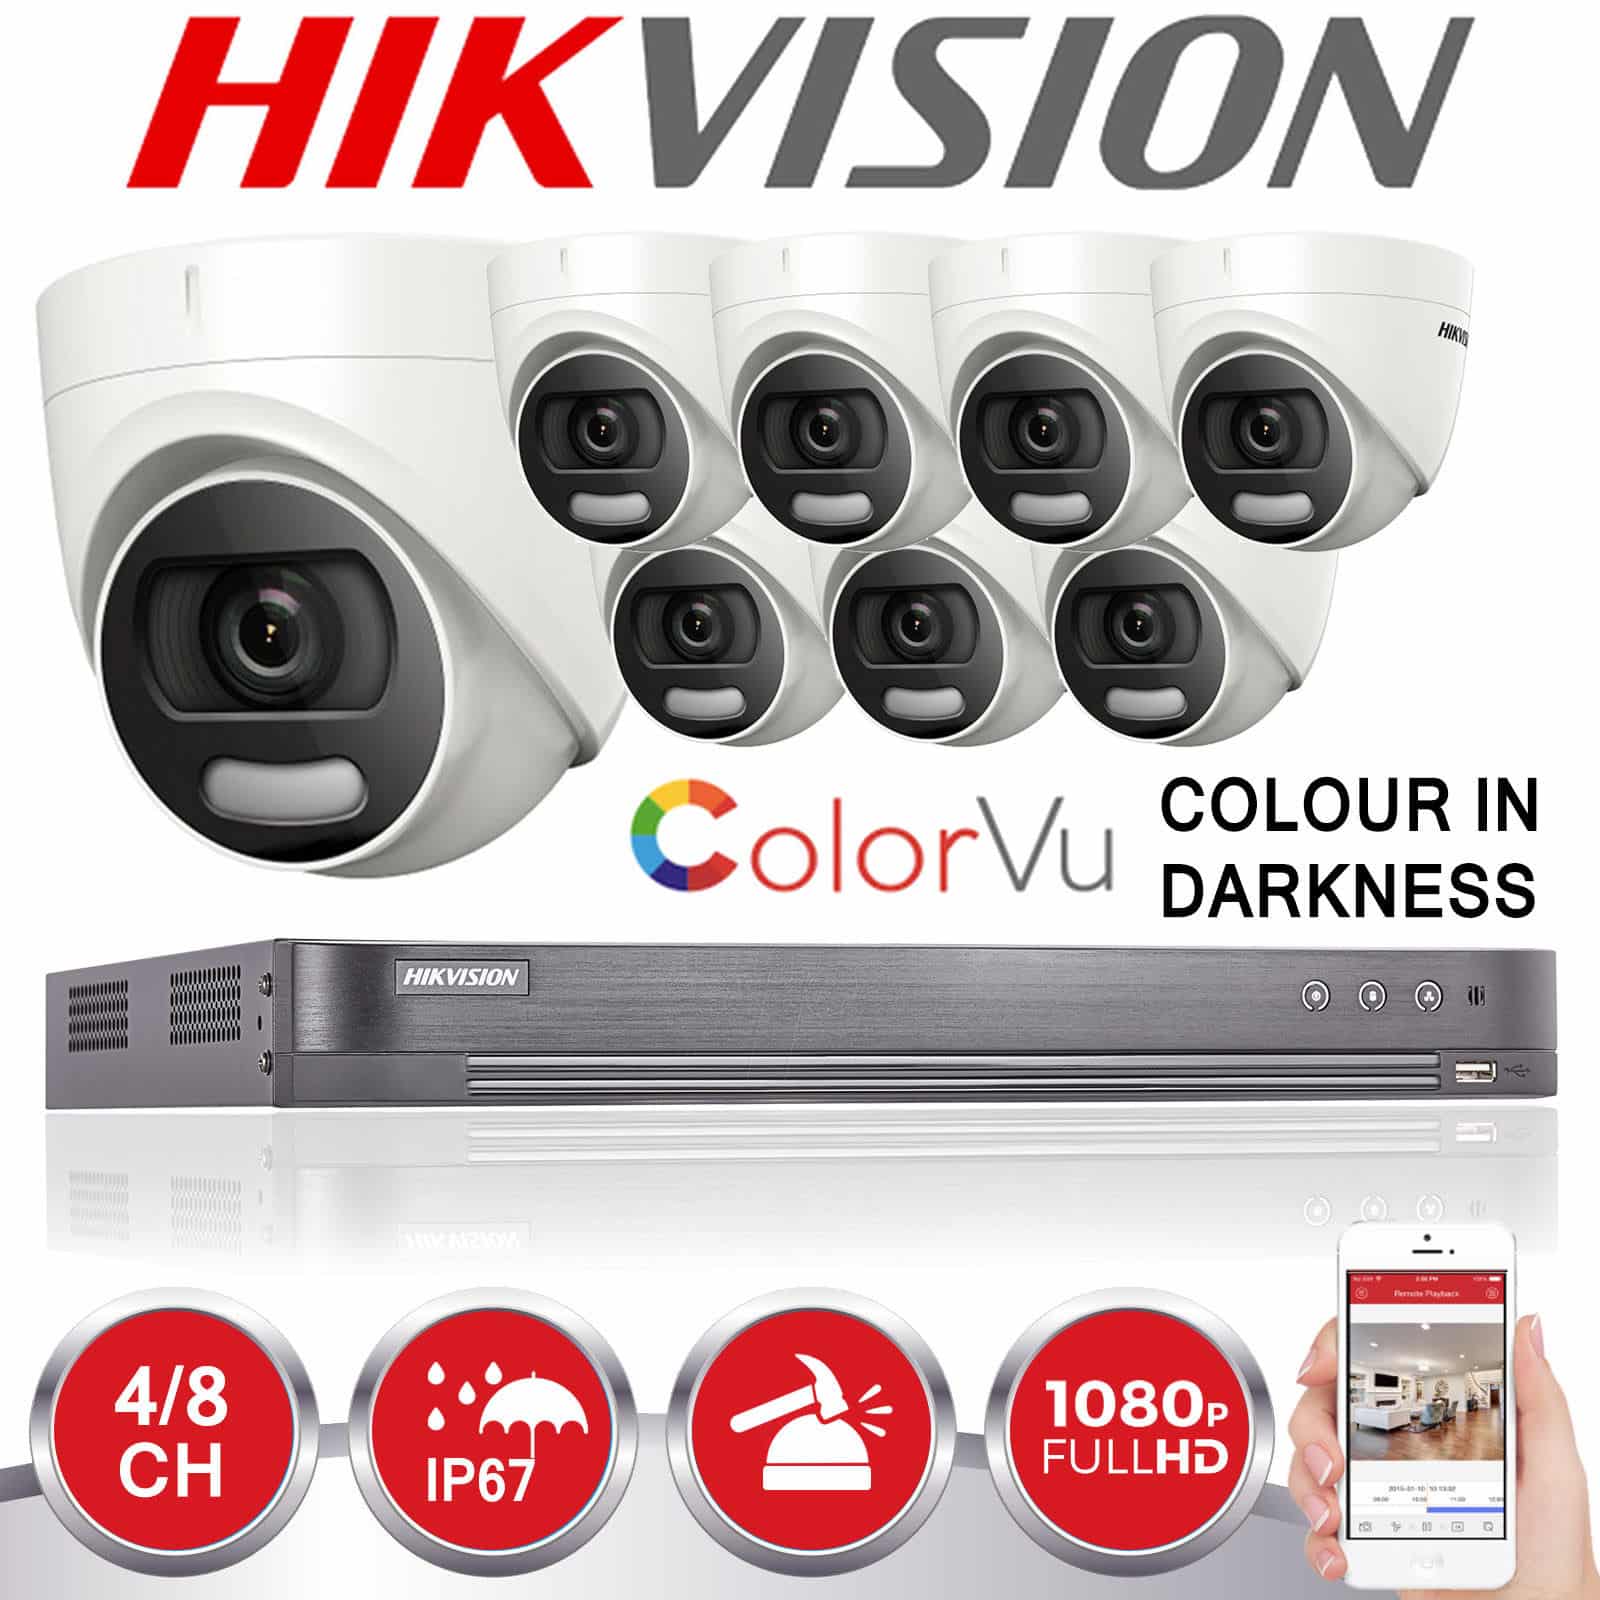 Hikvision HIKVISION HILOOK 5MP DVR OUTDOOR 24/7 COLORFUL CCTV CAMERA SECURITY HOME SYSTEM 